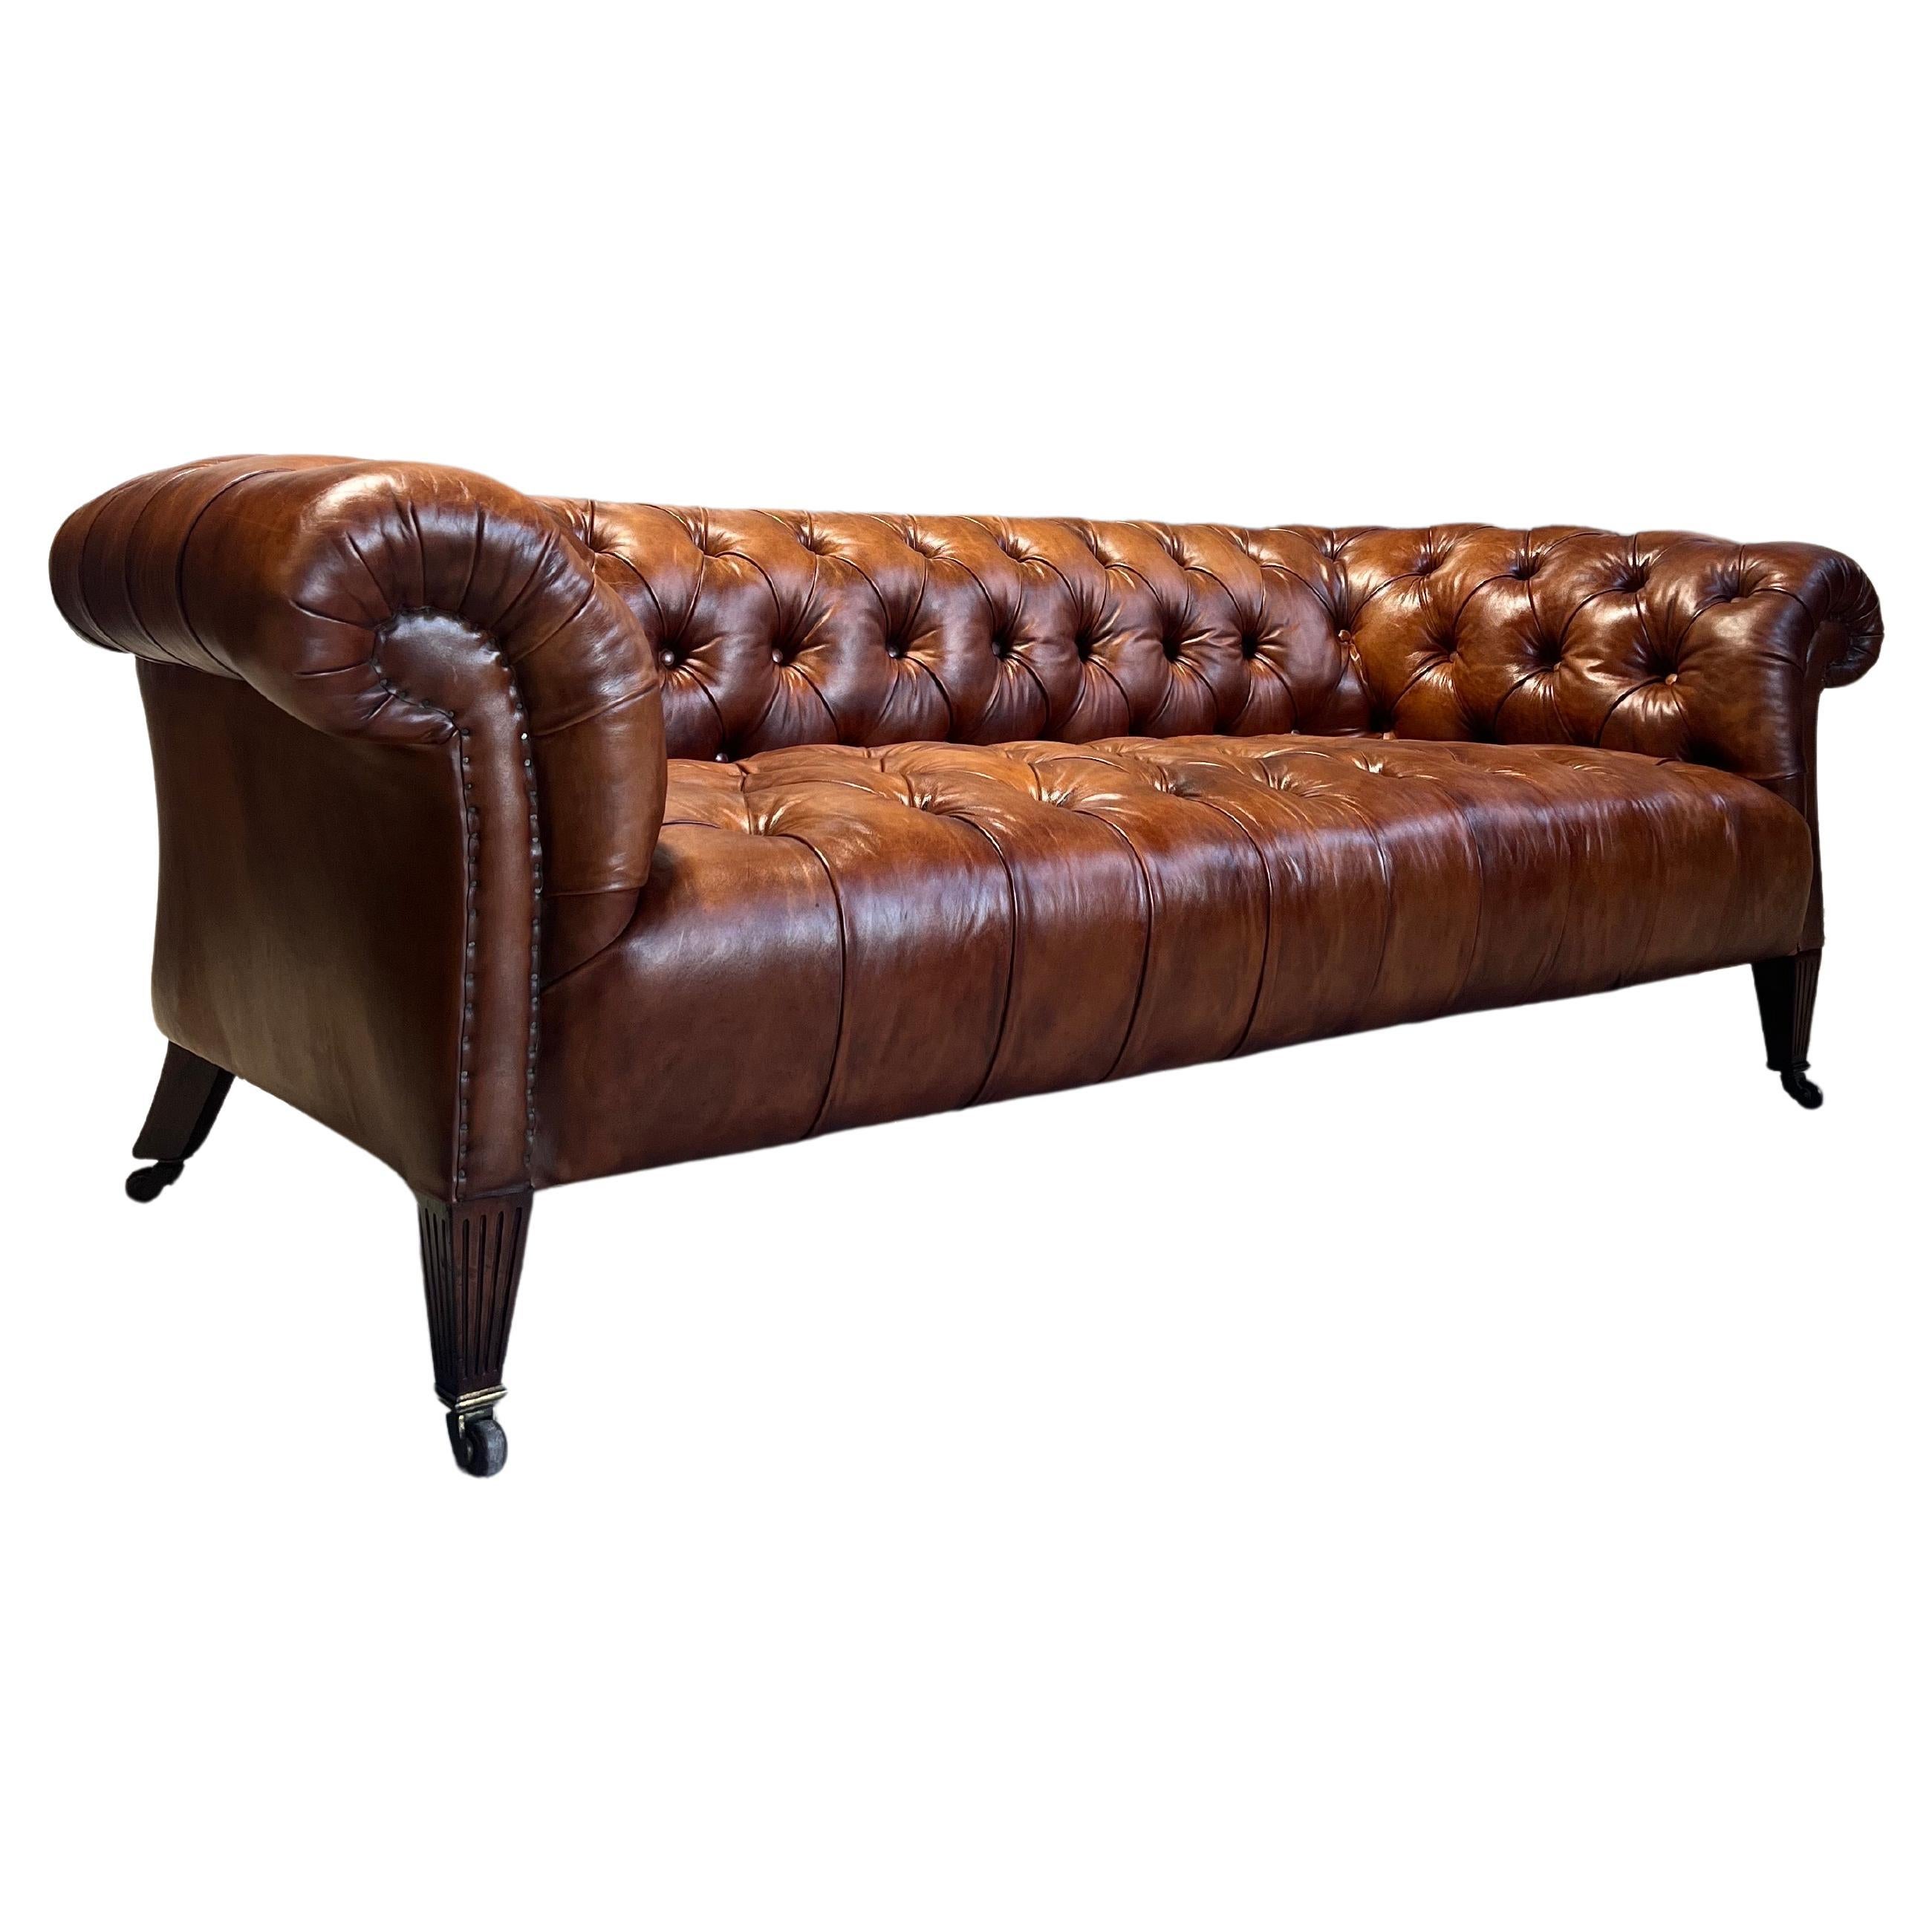 19thC Antique Hamptons & Sons Chesterfield Sofa In Hand Dyed Whiskey Leather For Sale